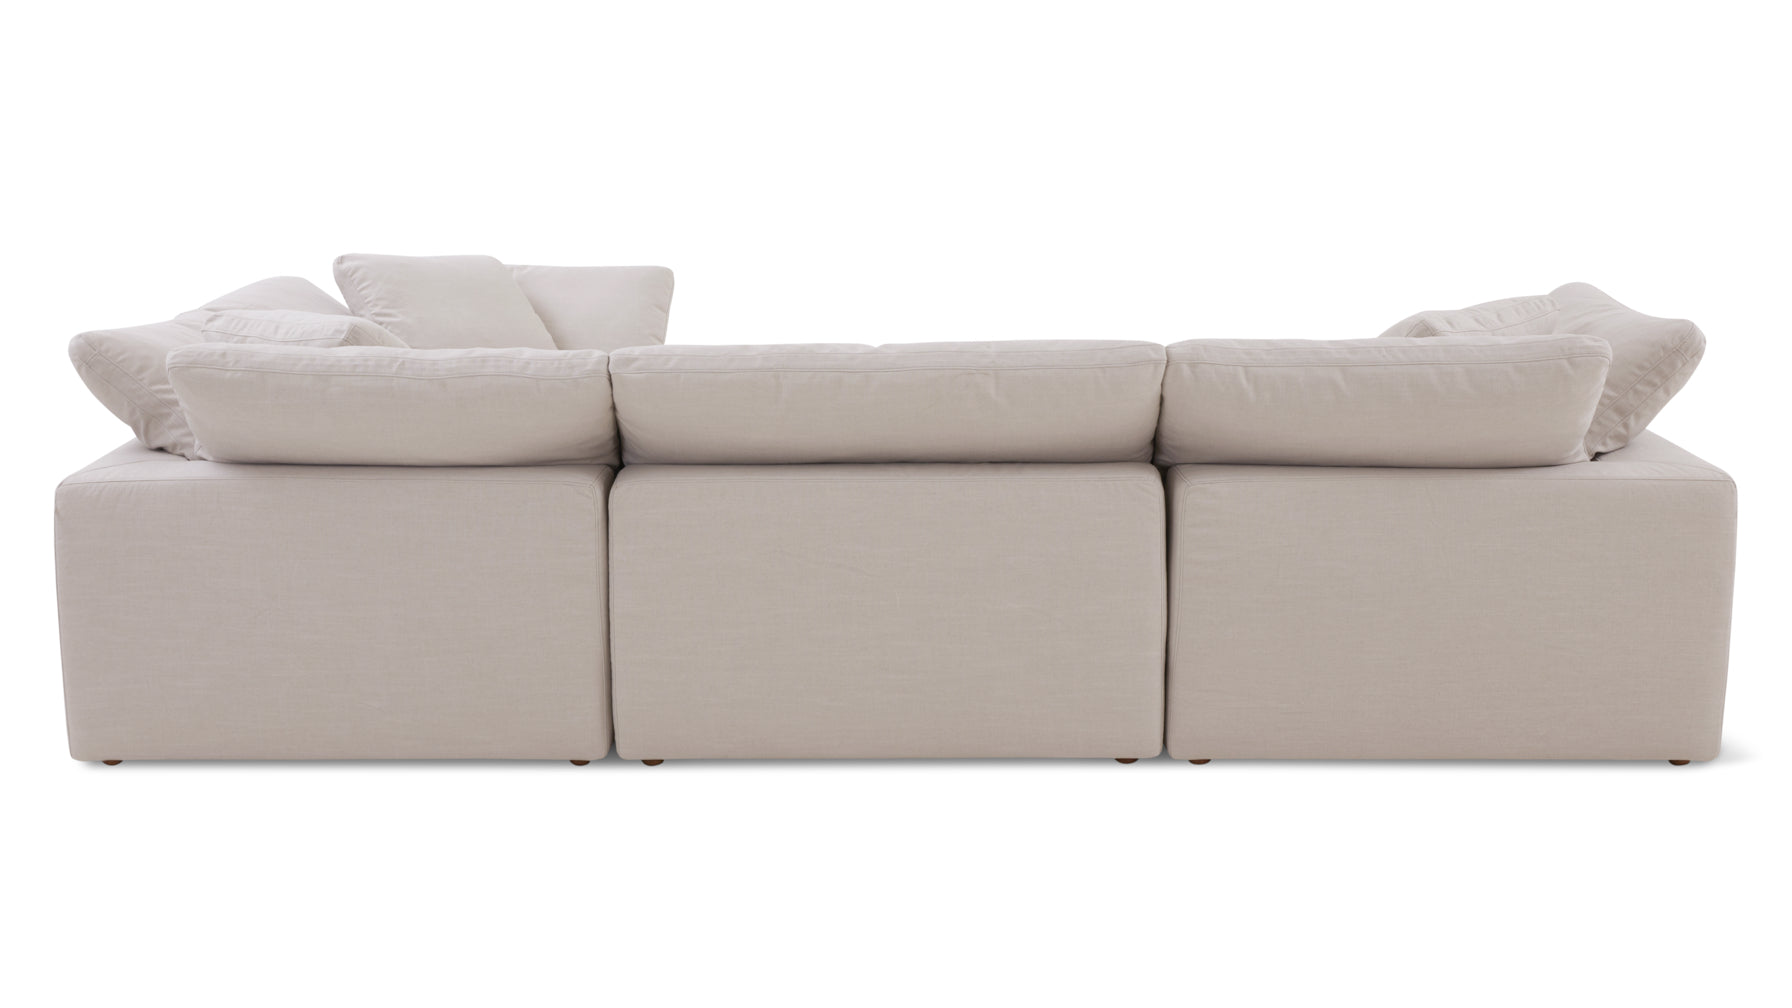 Movie Night™ 4-Piece Modular Sectional Closed, Standard, Clay - Image 8